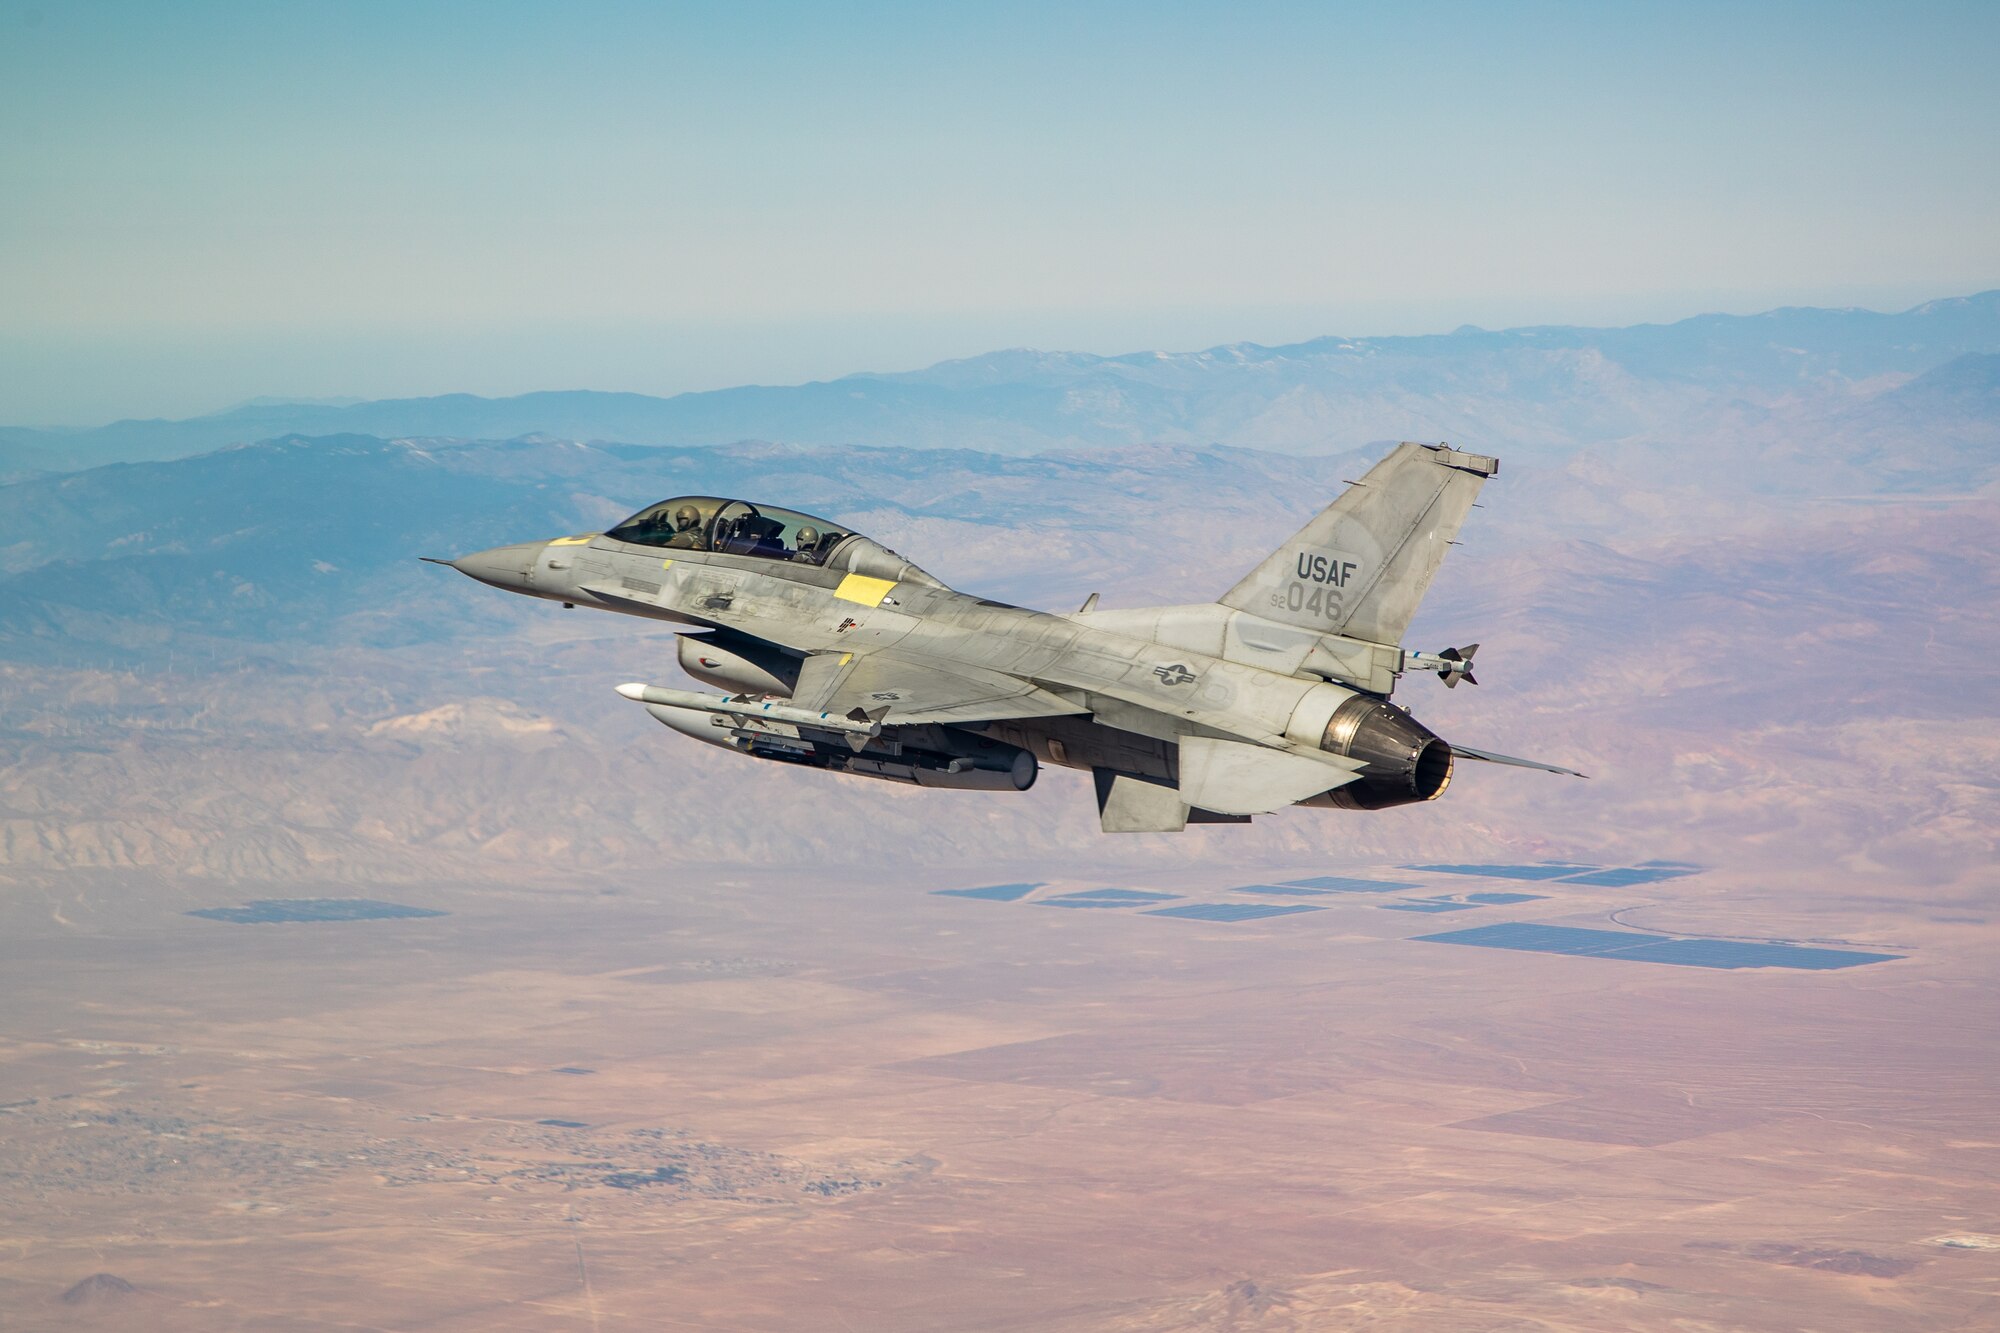 An F-16 assigned to the 416th Flight Test Squadron flies into position over the Precision Impact Range Area on Edwards Air Force Base, California, Feb. 26. The successful drop test was in support of the Korea F-16 Update Program. The ROKAF currently operates 133 KF-16C/D Block 50/52 fighter aircraft, all of which will undergo extensive modernization and upgrades as part of the comprehensive improvement program. Lockheed Martin was awarded a $1.2 billion contract to retrofit the 133 KF-16s and upgrade them to the advanced F-16V configuration, which is the latest technologically and most advanced version of the fourth generation fighter jet. (Air Force photo by Ethan Wagner)